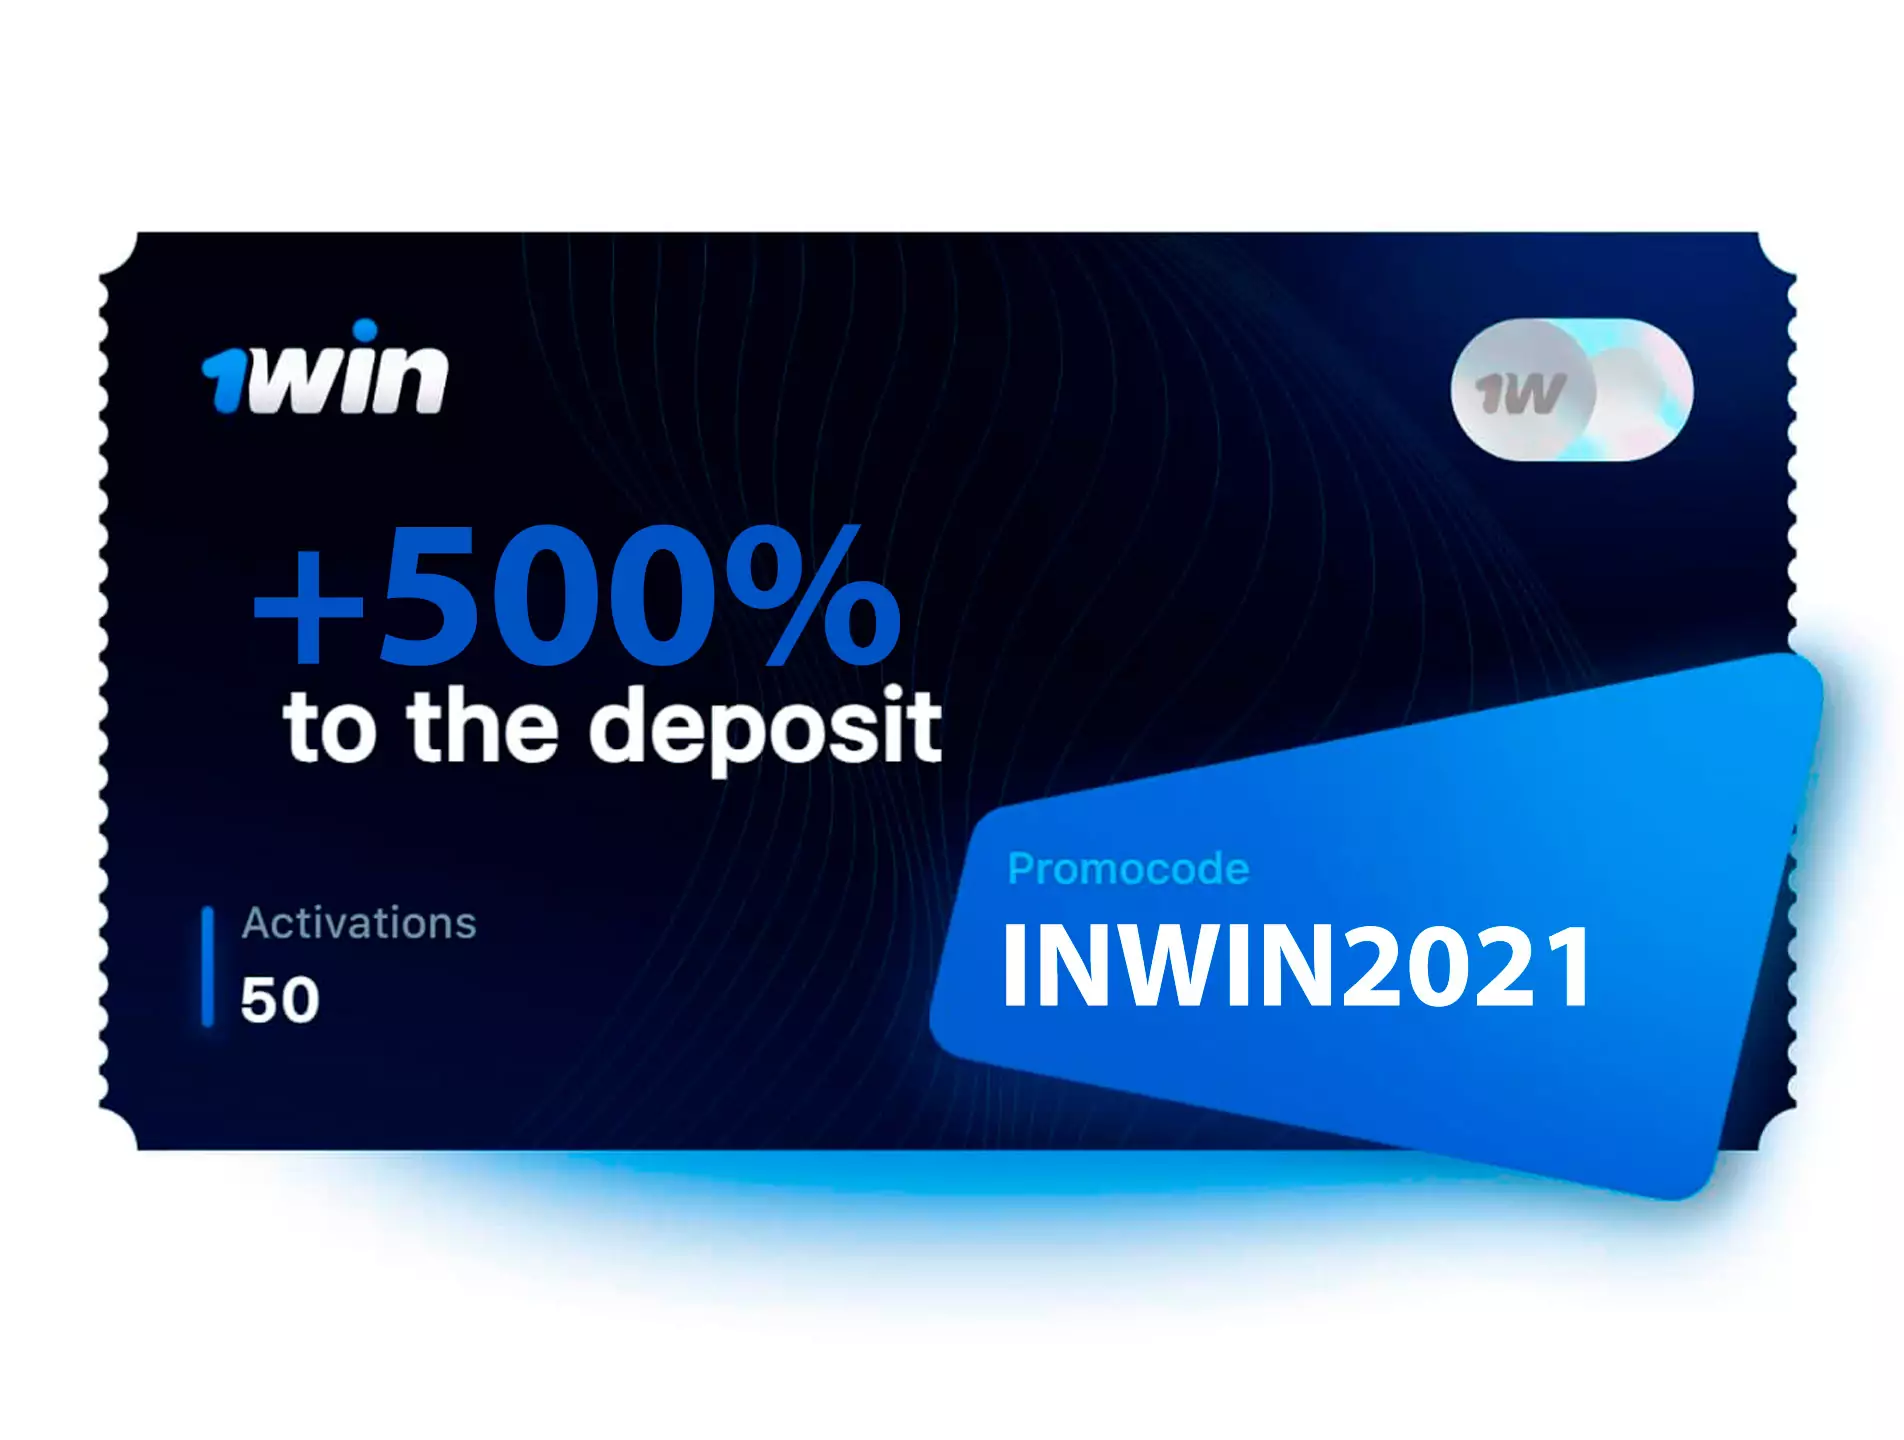 Use our promo code INWIN2021 for a bonus of INR 75,000.